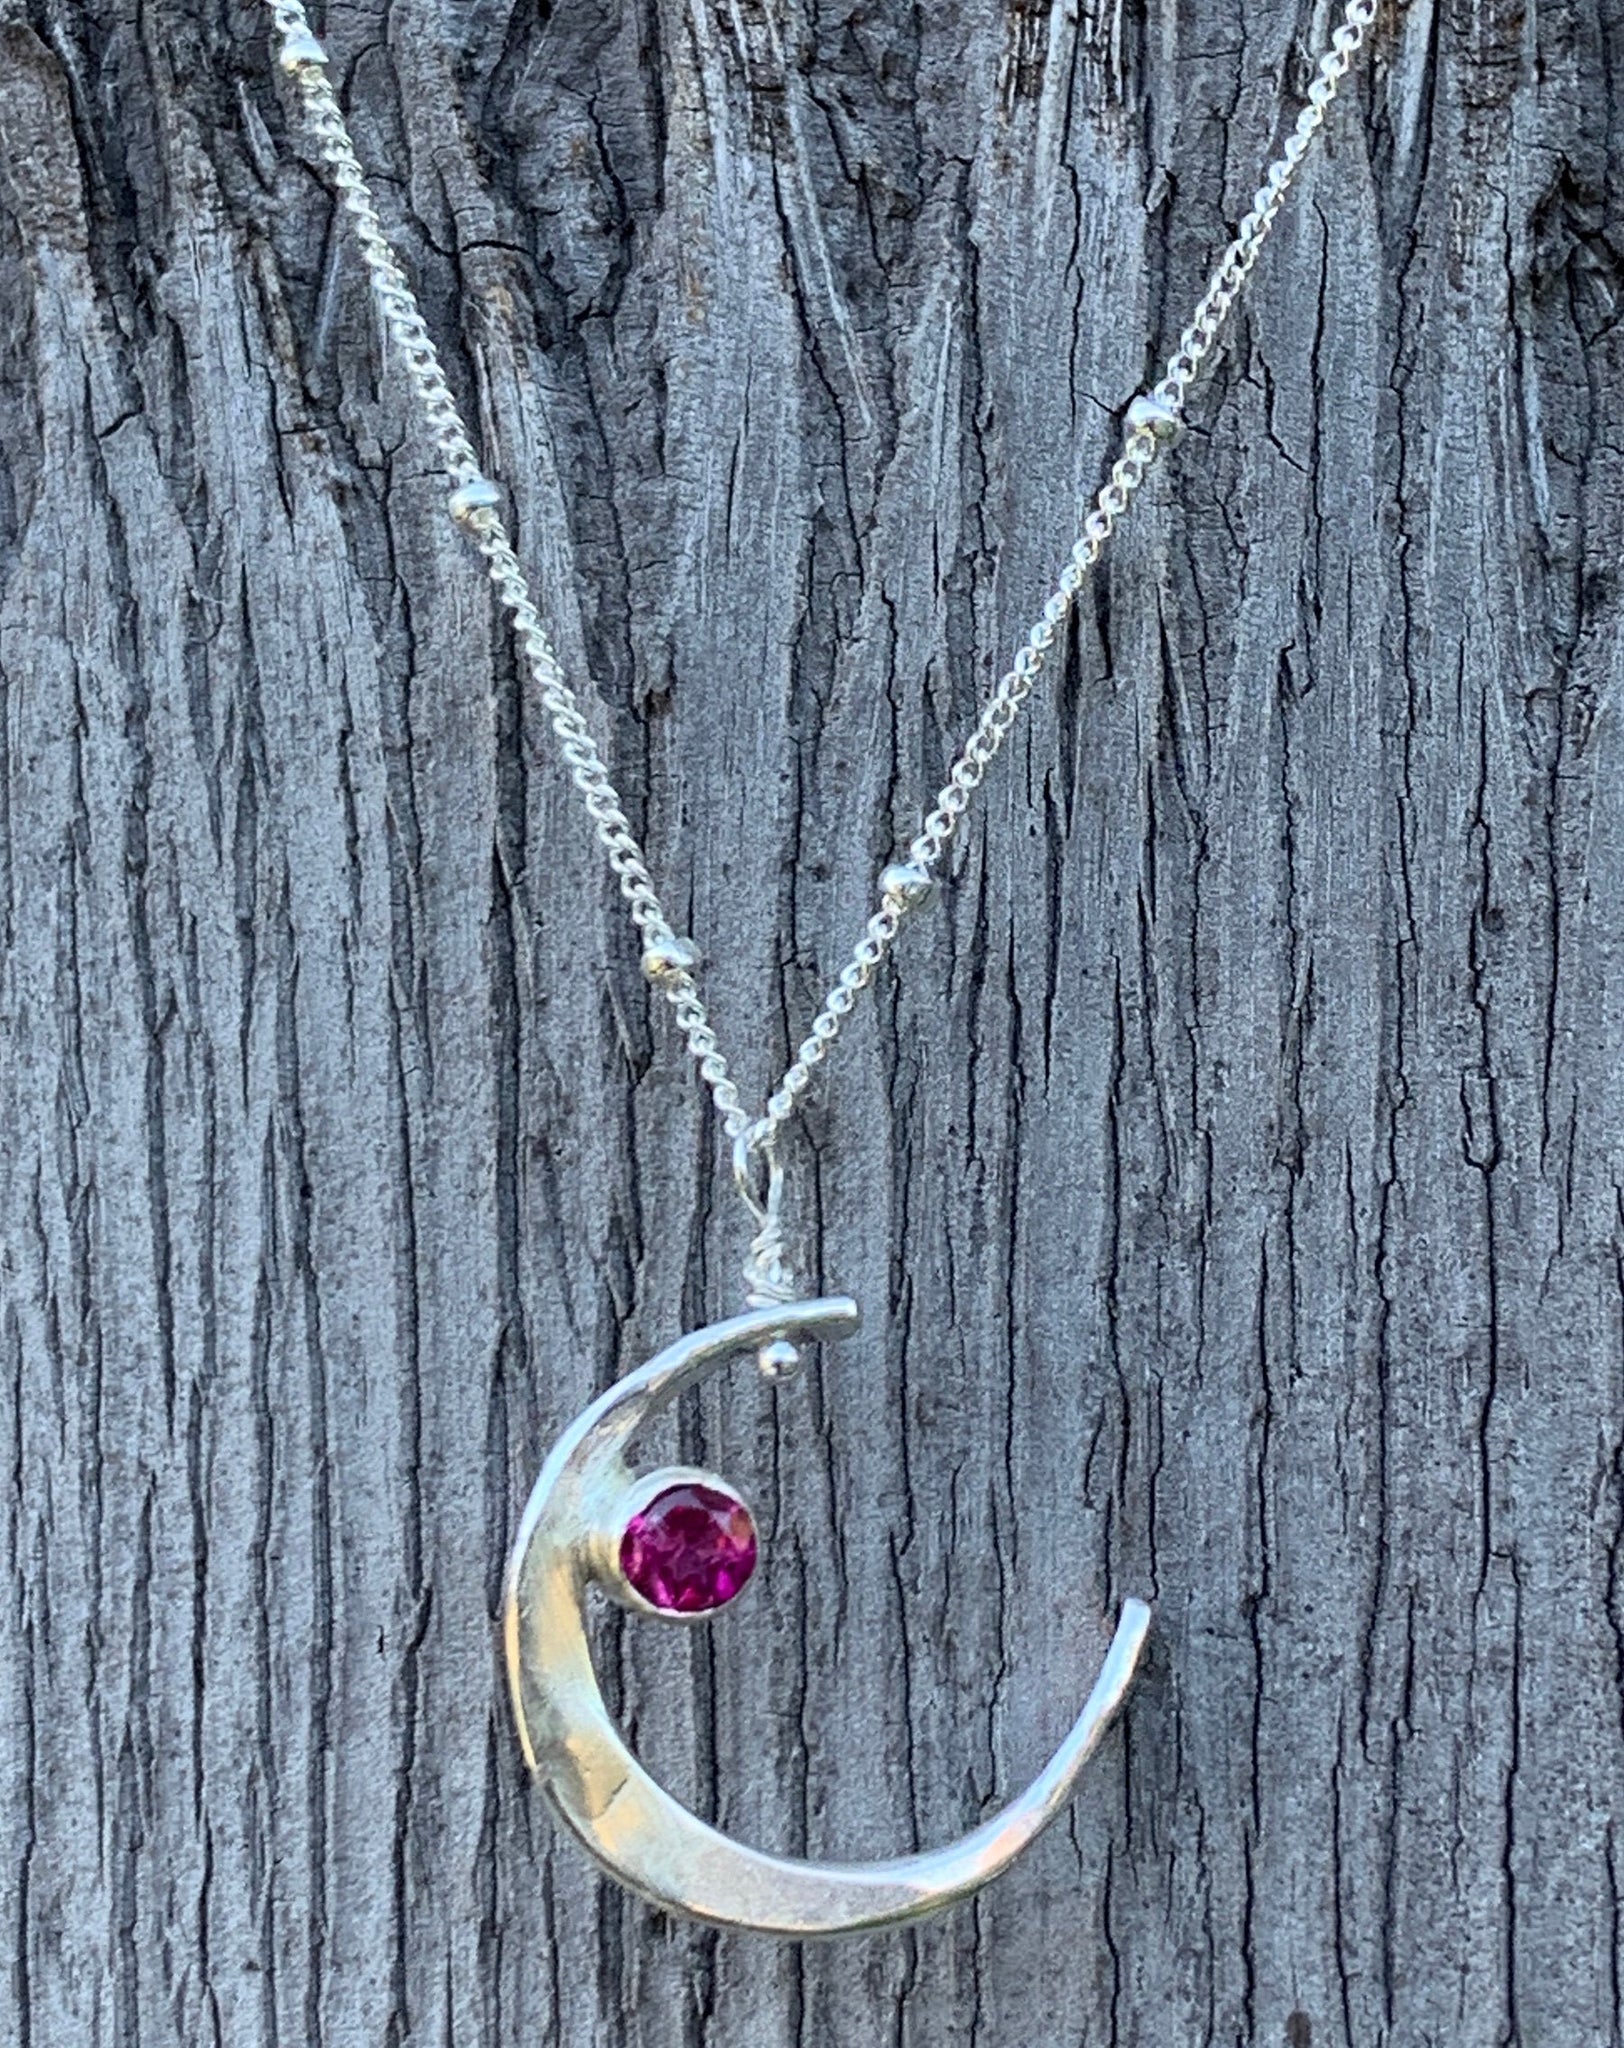 Handmade Sterling Silver Crescent Moon Necklace with Tube Set Pink Tourmaline